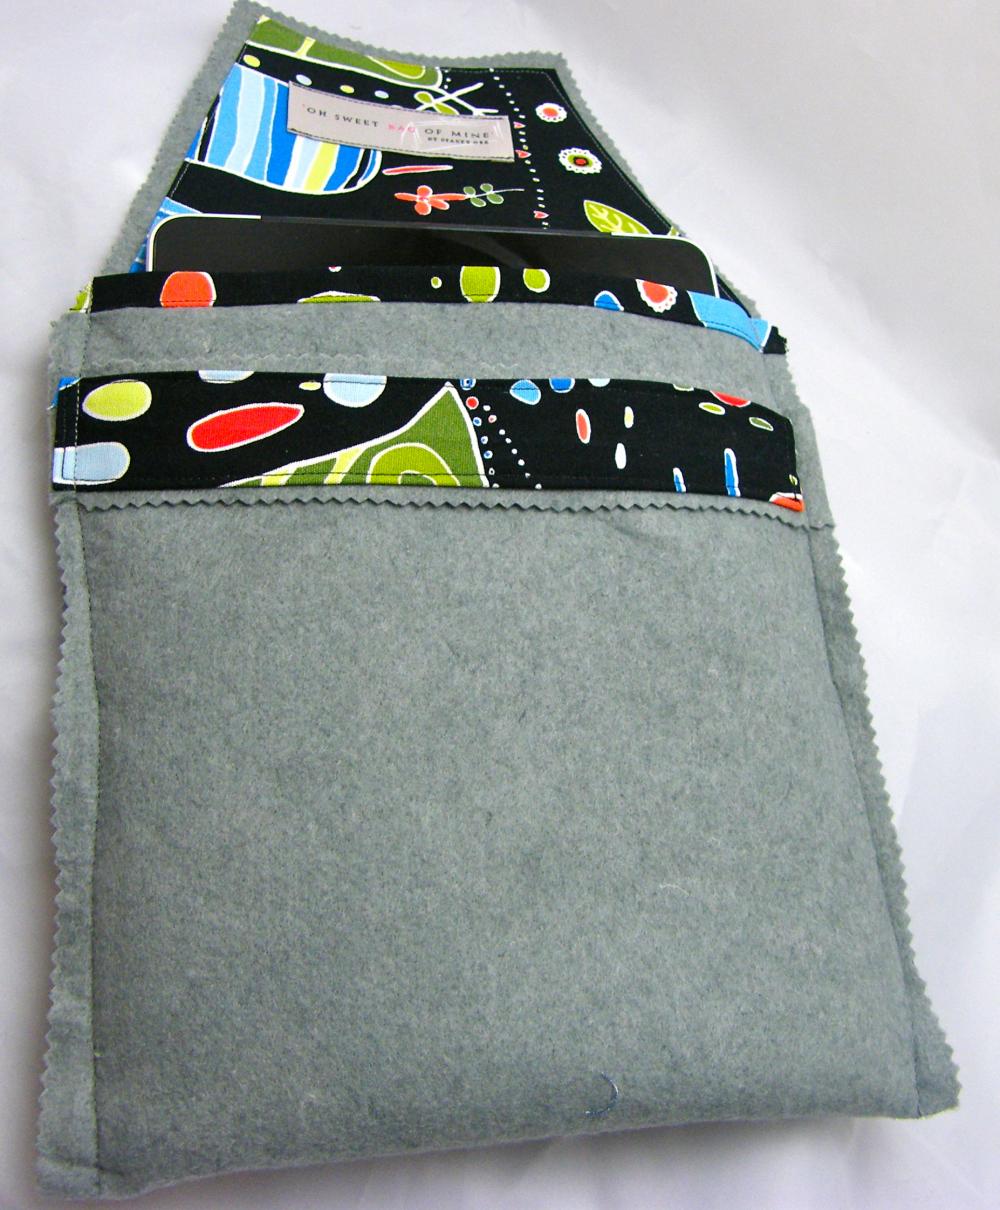 Ipad Cover - Grey Felt With Black Patterned Cotton